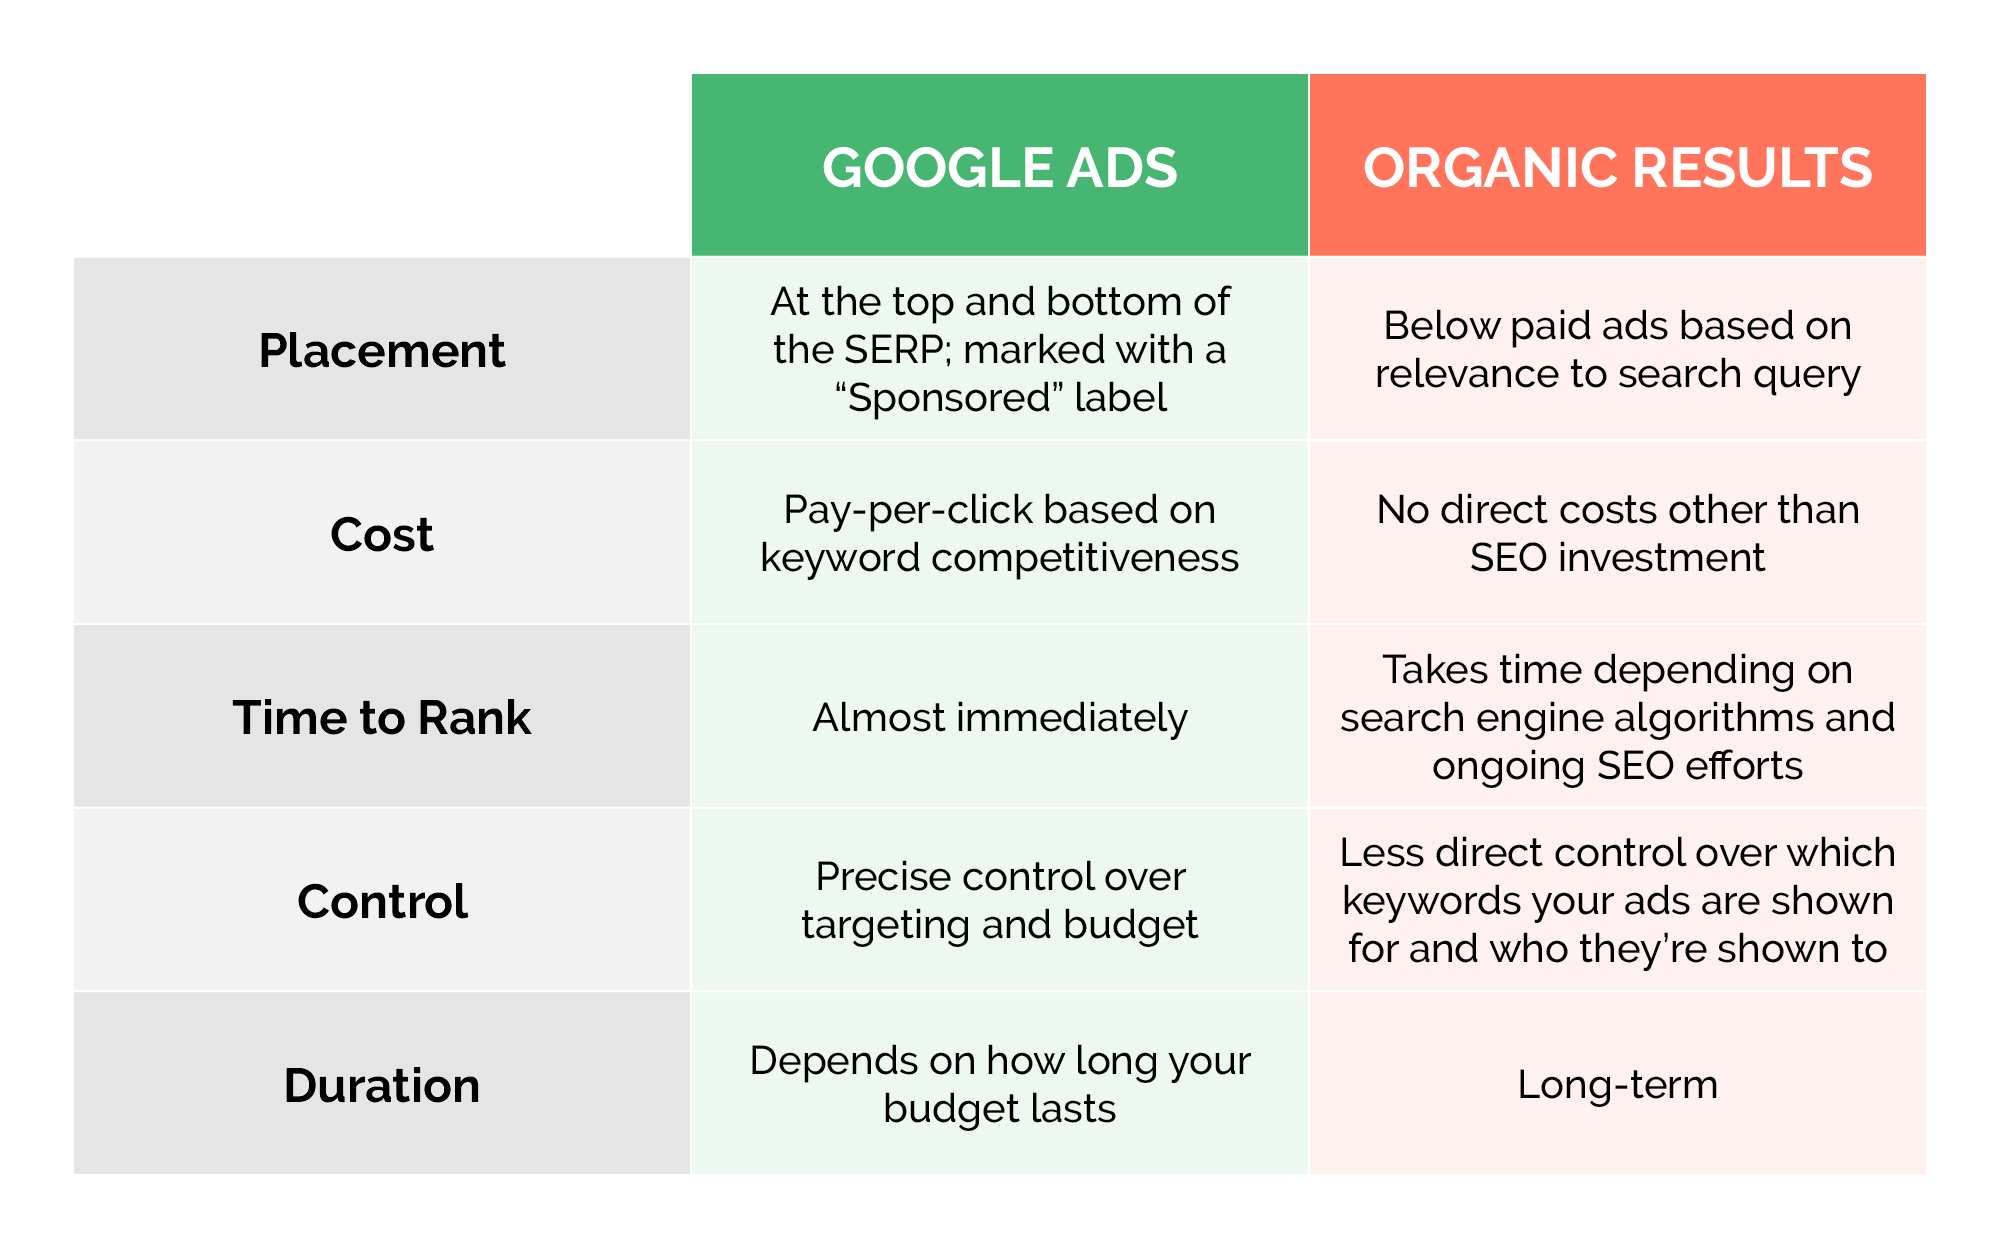 A chart comparing the differences between Google Ads and organic results